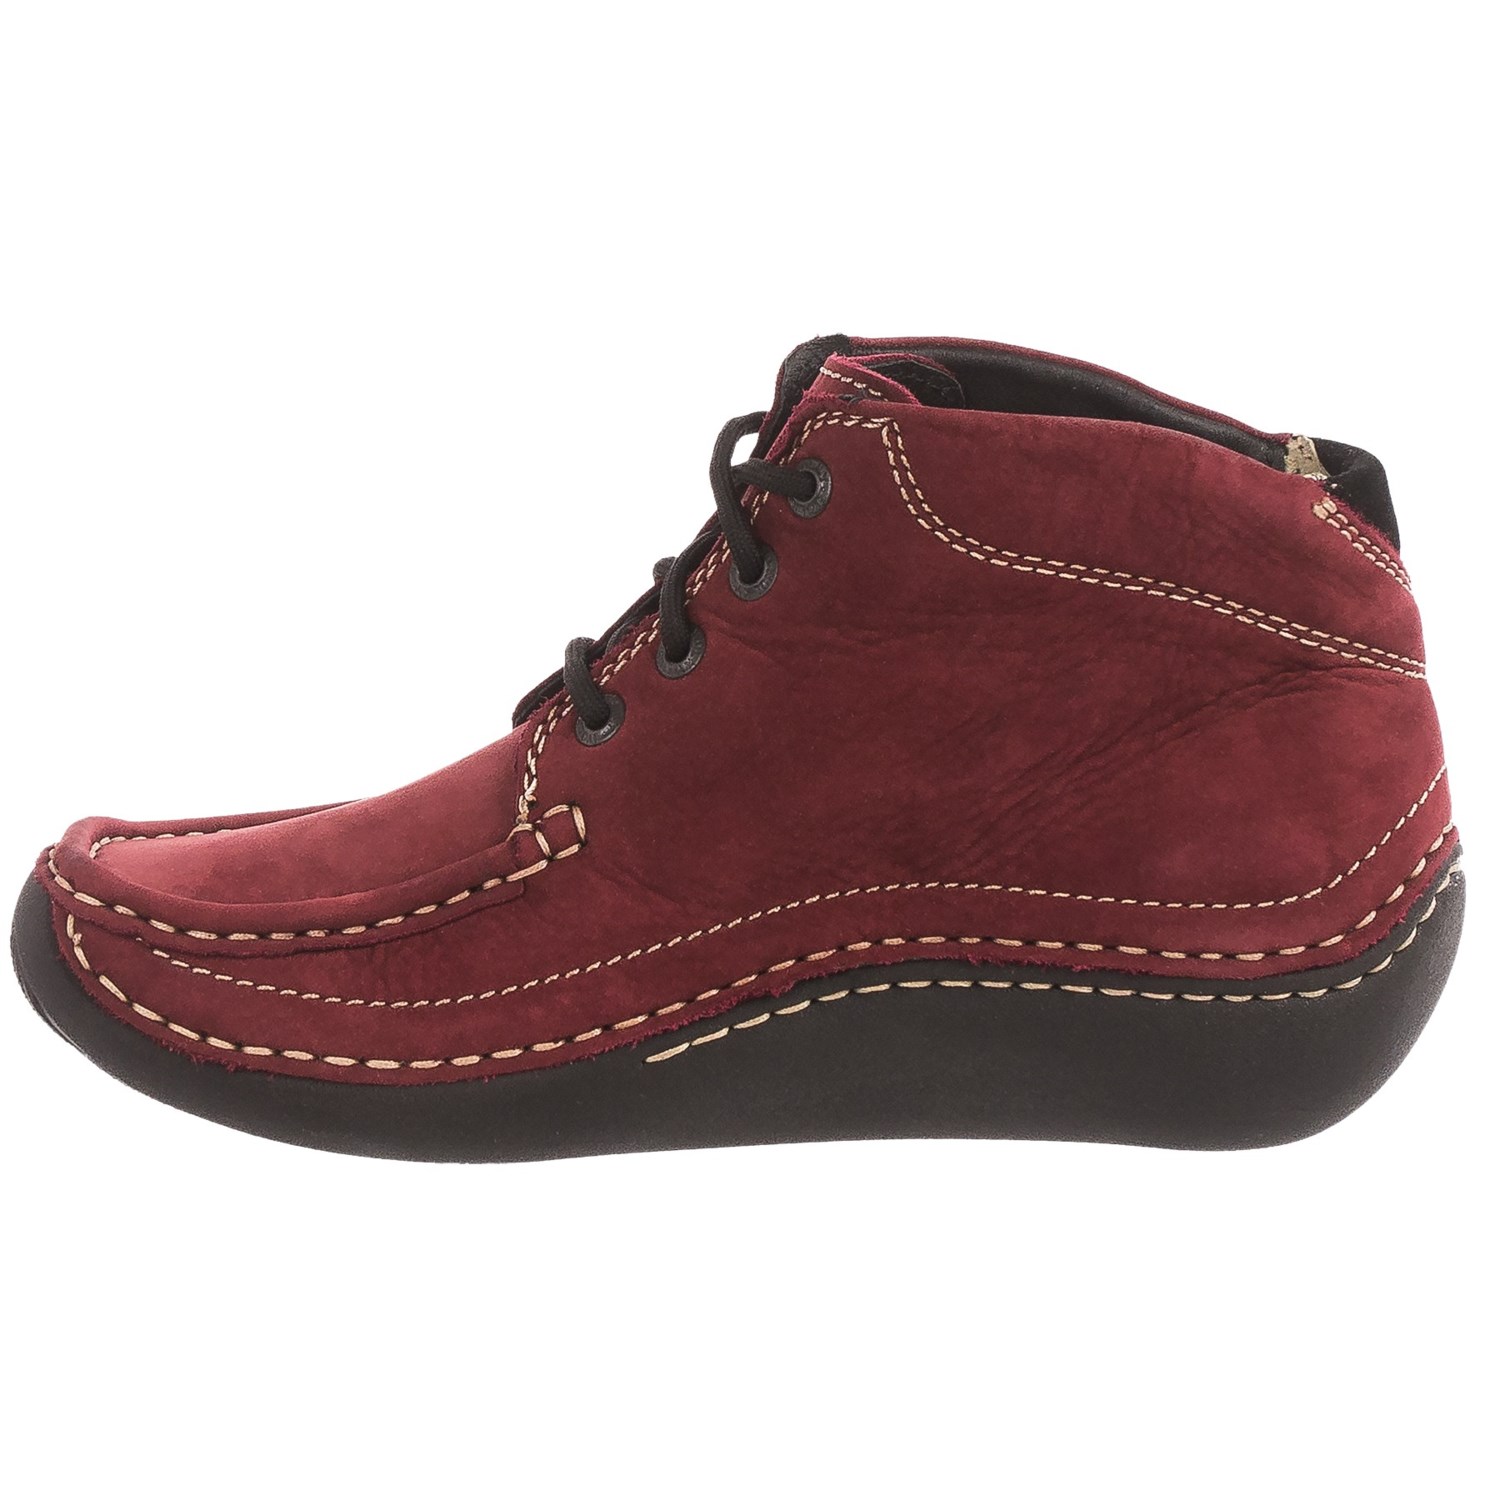 Wolky Gina Ankle Boots (For Women) - Save 70%